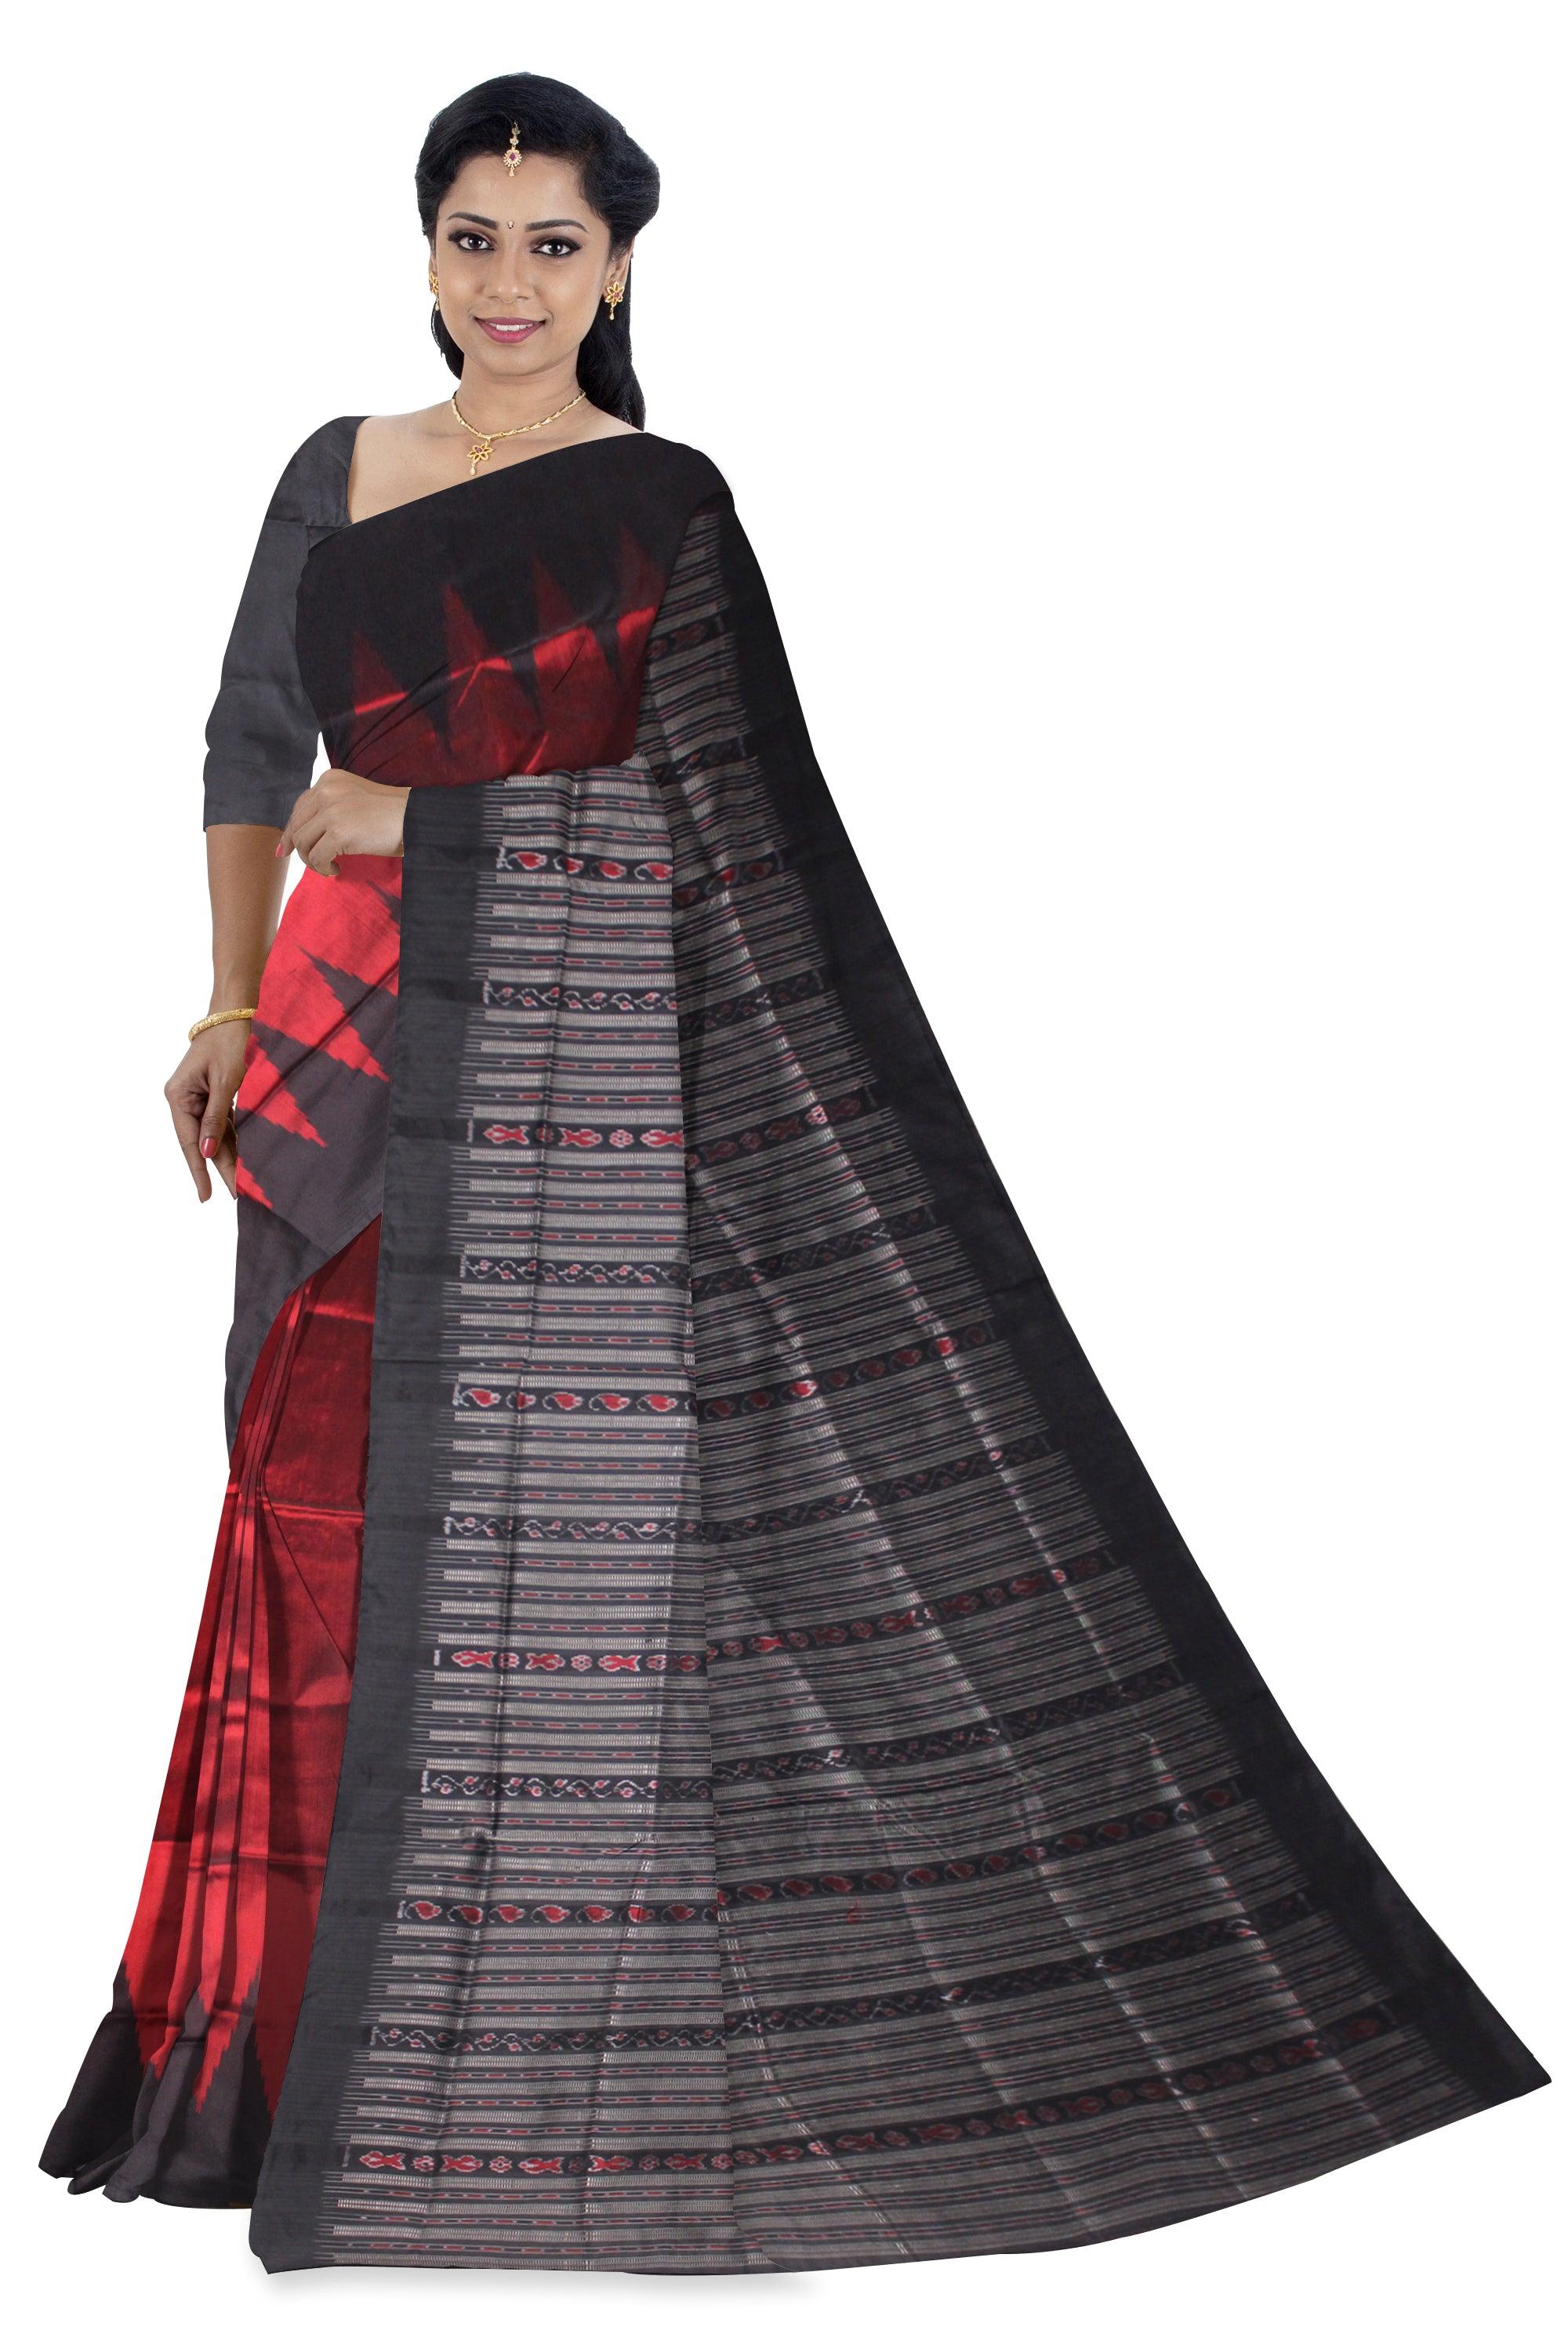 Modern Look MIx PATA SAREE IN MAROON Color in PLAIN DESIGN WITH BLOUSe PIECE. - Koshali Arts & Crafts Enterprise